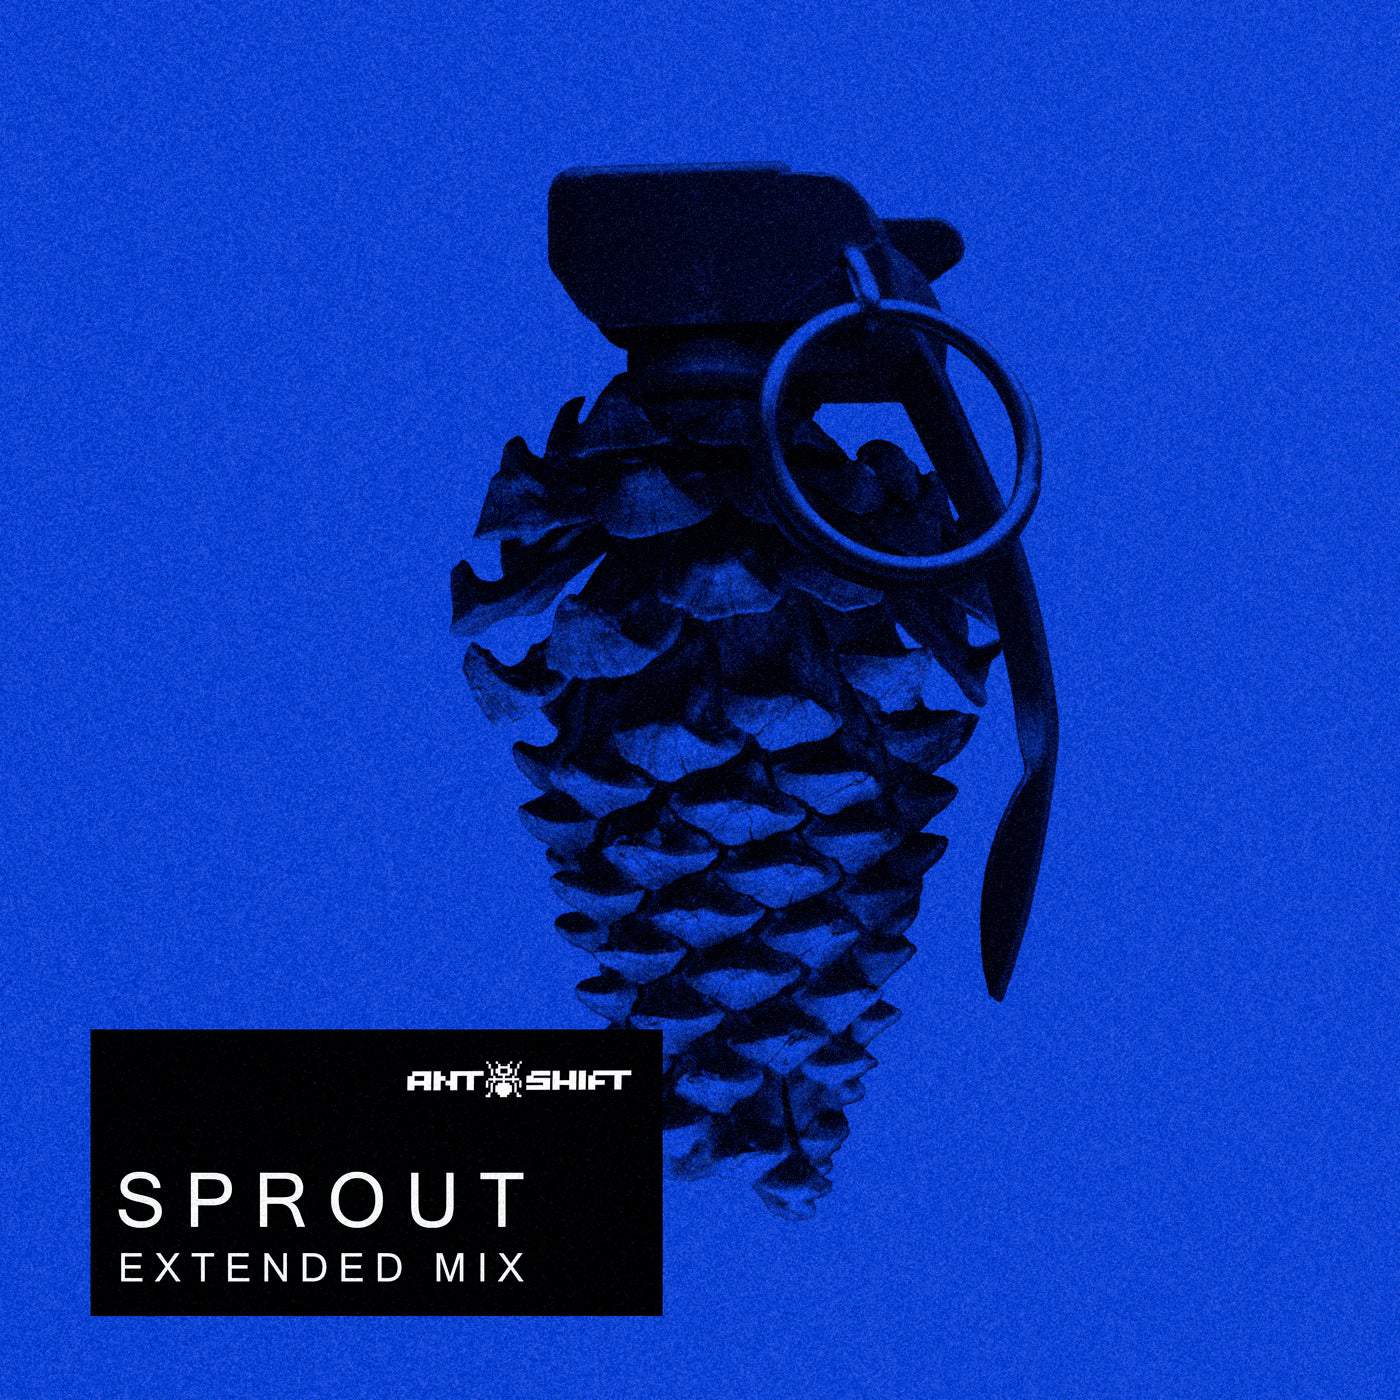 image cover: Ant+Shift - Sprout (Extended Mix) / ant17012022si1